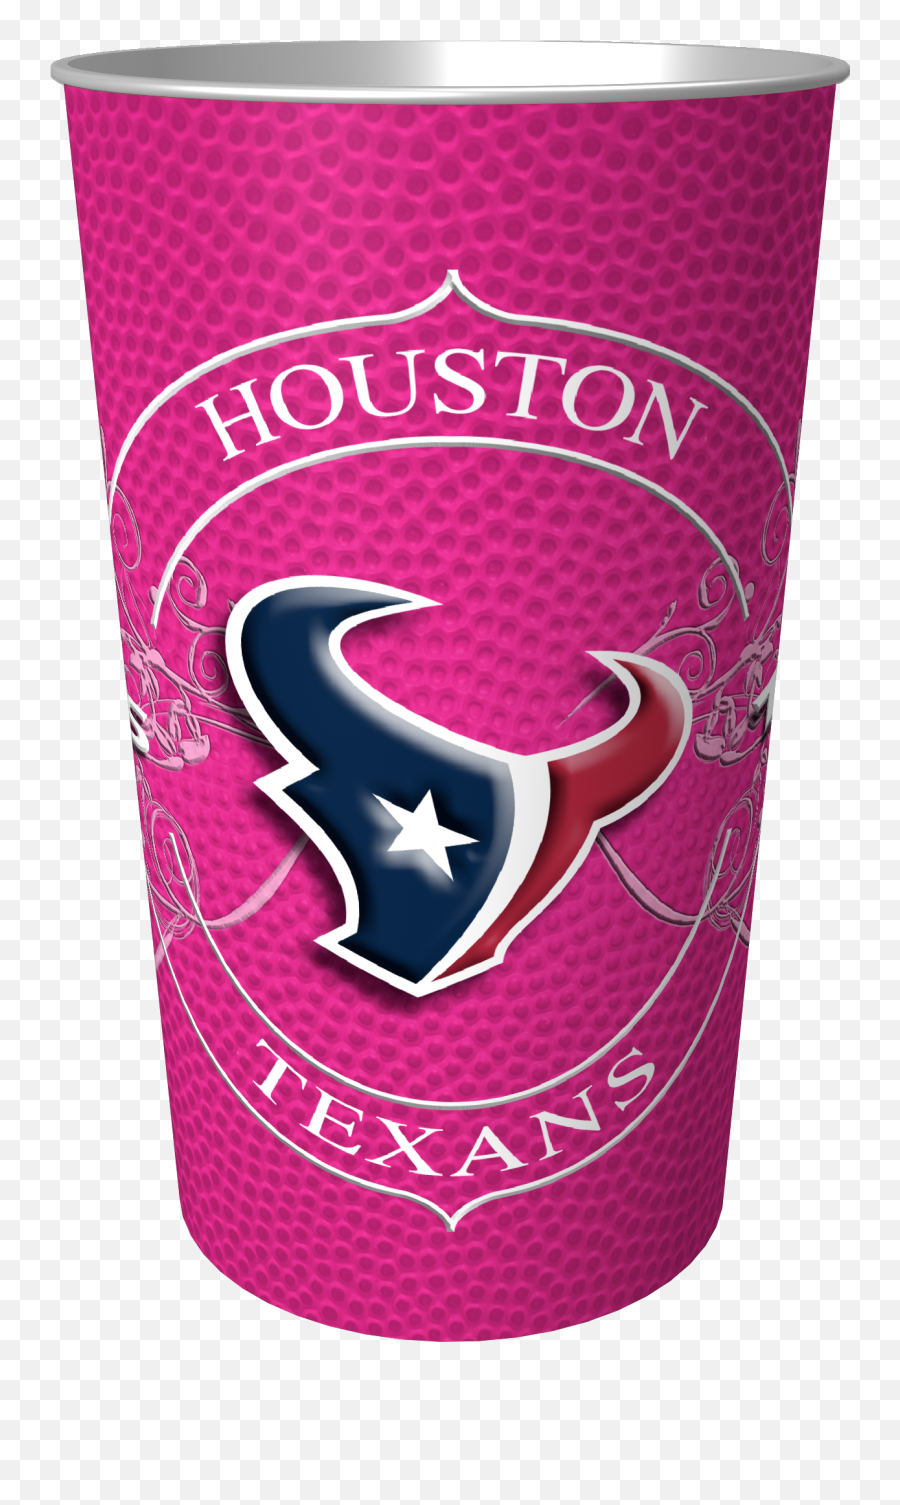 Houston Texans Pink Oz Cup Count Png - Baltimore Ravens Vs Houston Texans,Houston Texans Logo Image